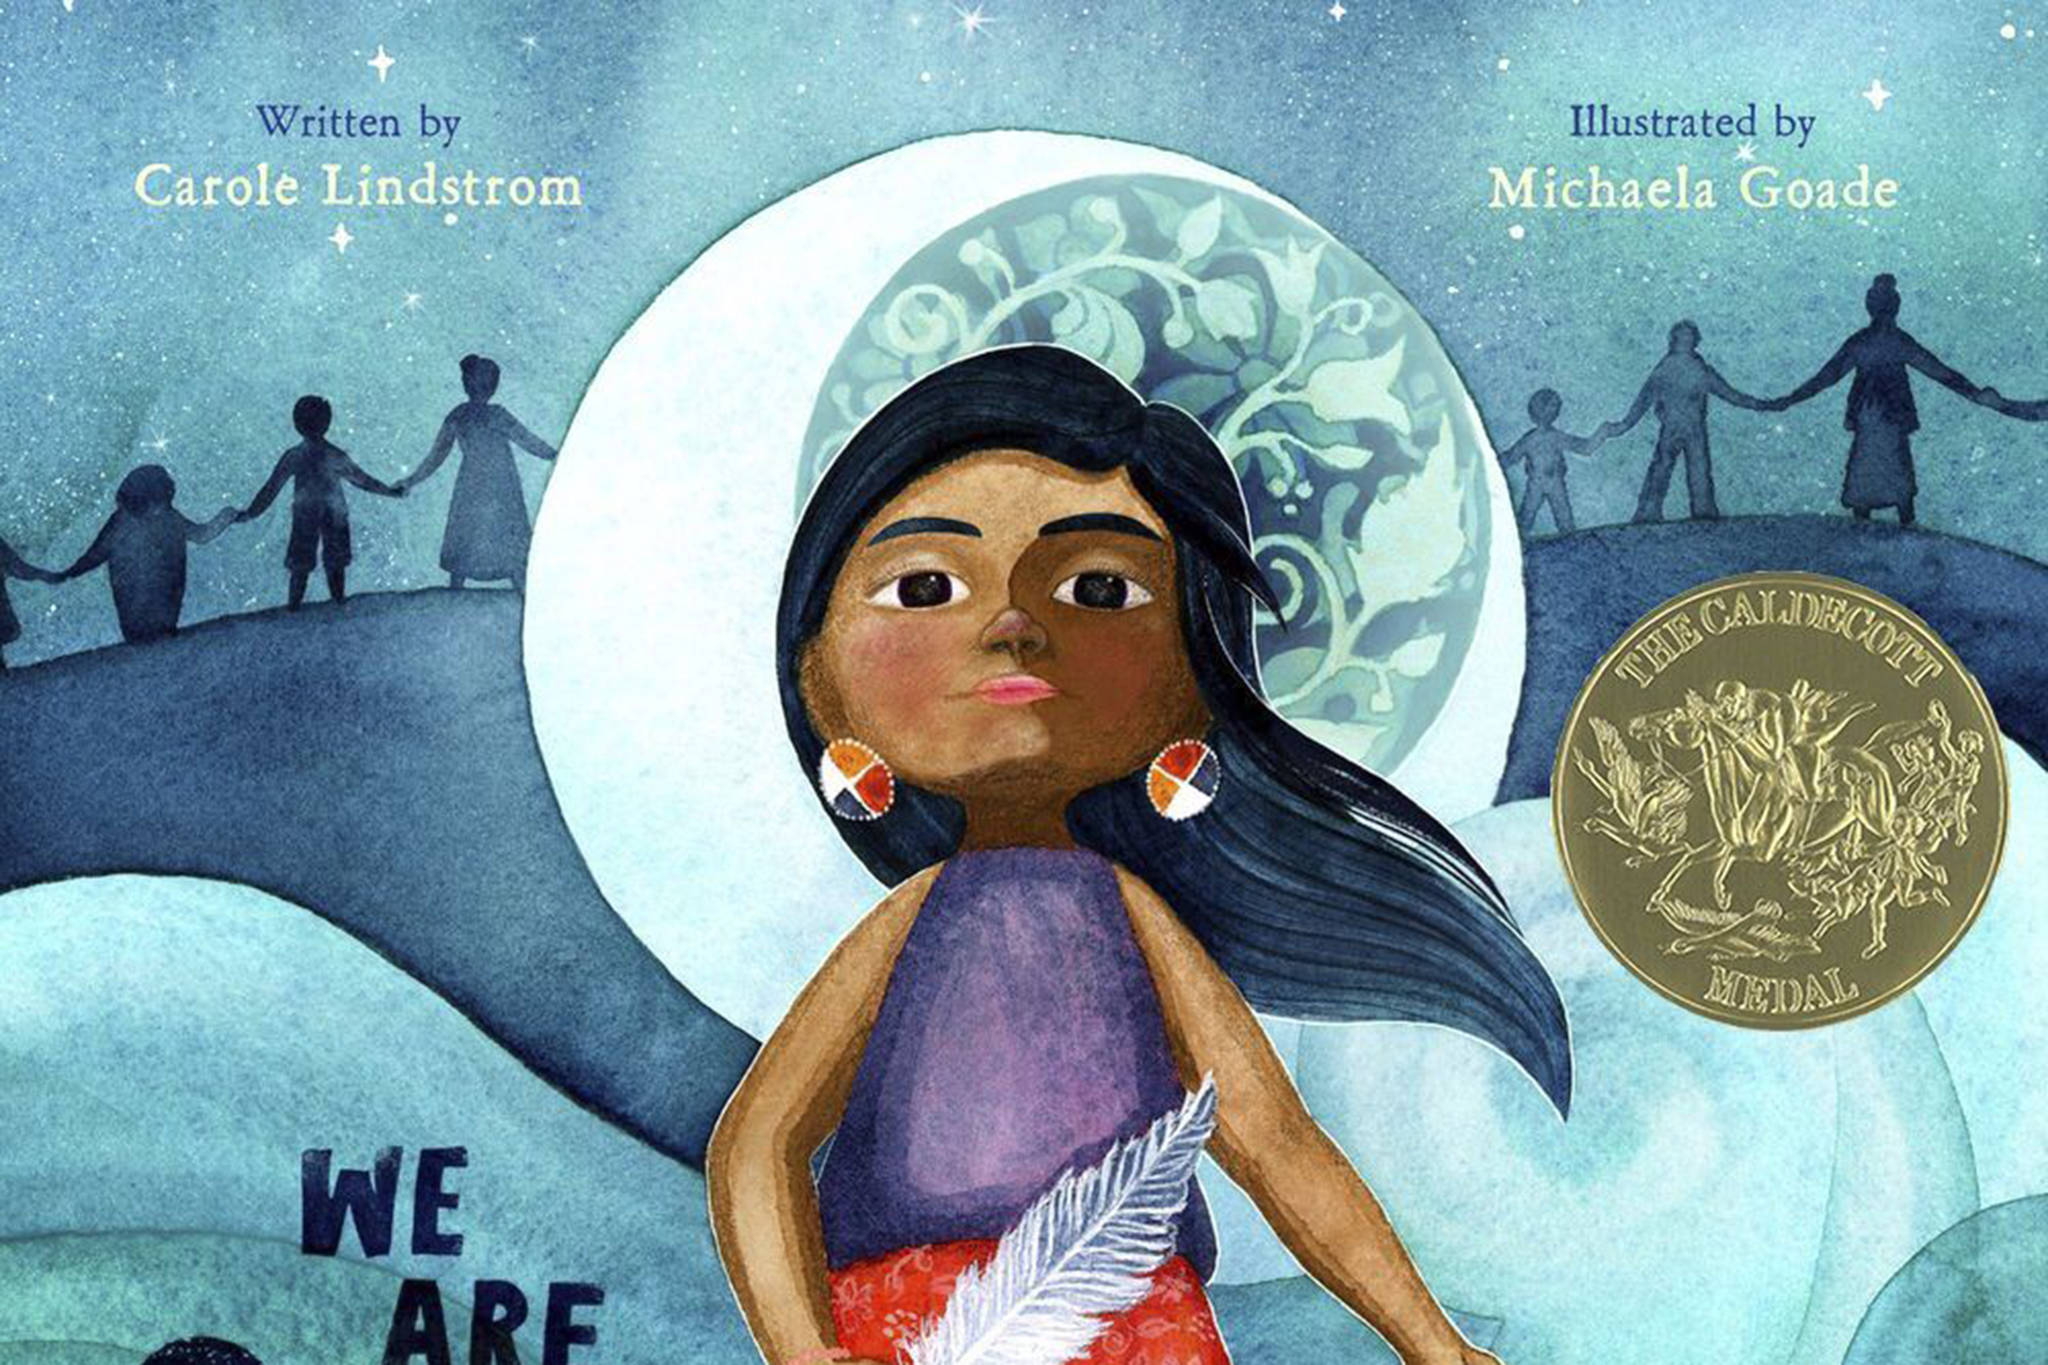 This cover image released by Roaring Brook Press shows "We Are Water Protectors," written by Carol Lindstrom and illustrated by Michaela Goade. Goade became the first Native American to win the prestigious Randolph Caldecott Medal for best children's picture story. Goade is a member of the Tlingit and Haida Indian tribes in Southeast Alaska. “We Are Water Protectors,” is a call for environmental protection that was conceived in response to the planned construction of the Dakota Access Pipeline through Standing Rock Sioux territory. (Roaring Brook Press via AP)